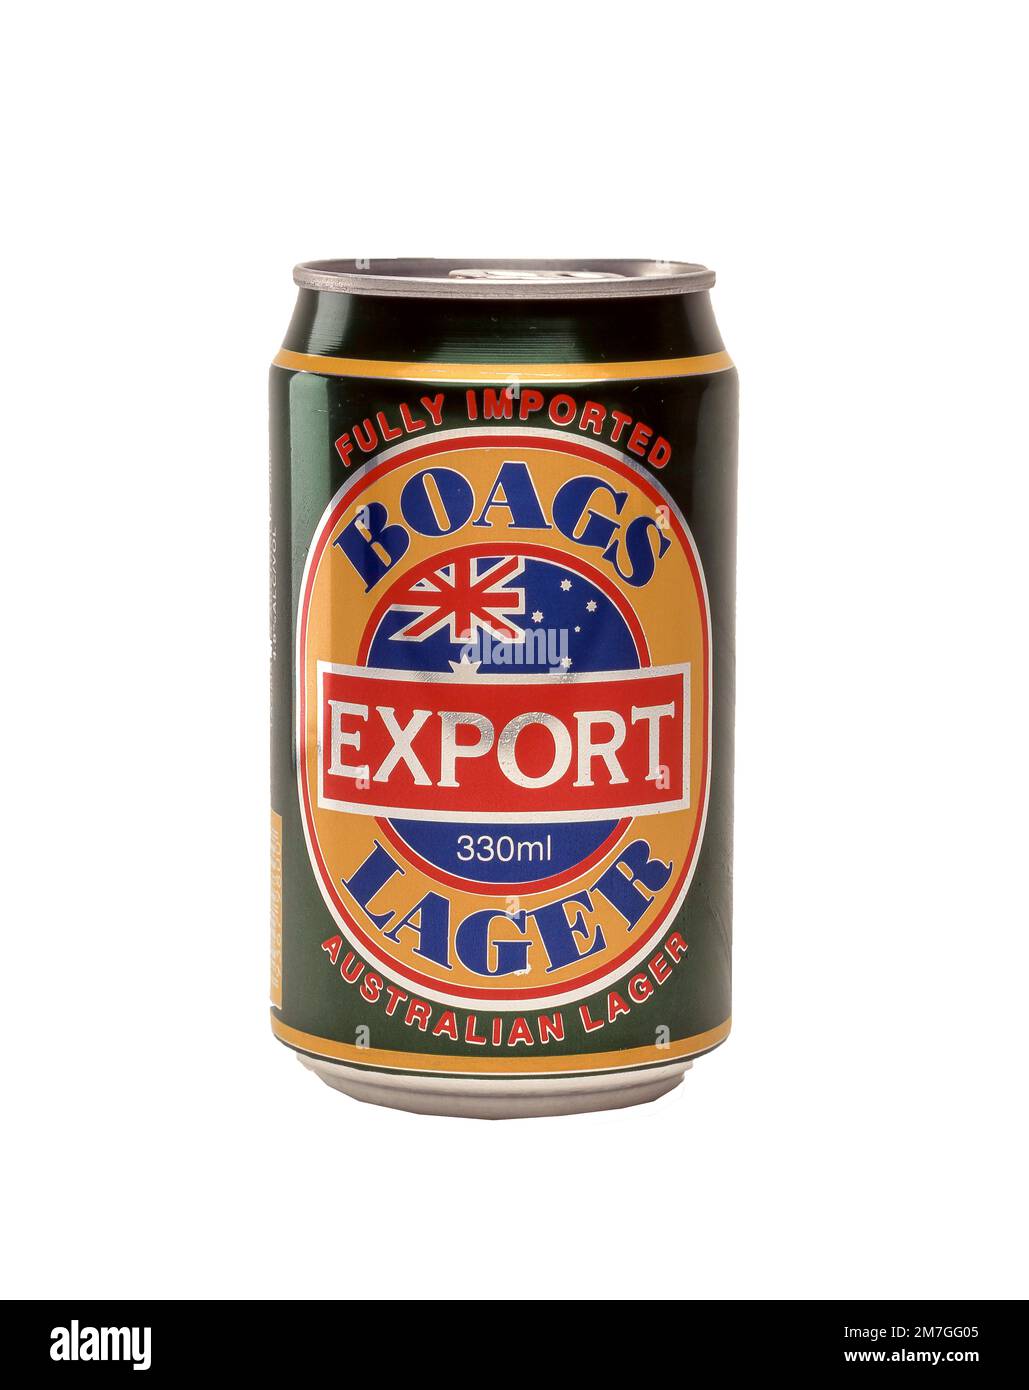 Can of Boag's Brewery Australian Export Lager, Sydney, New South Wales, Australien Stockfoto